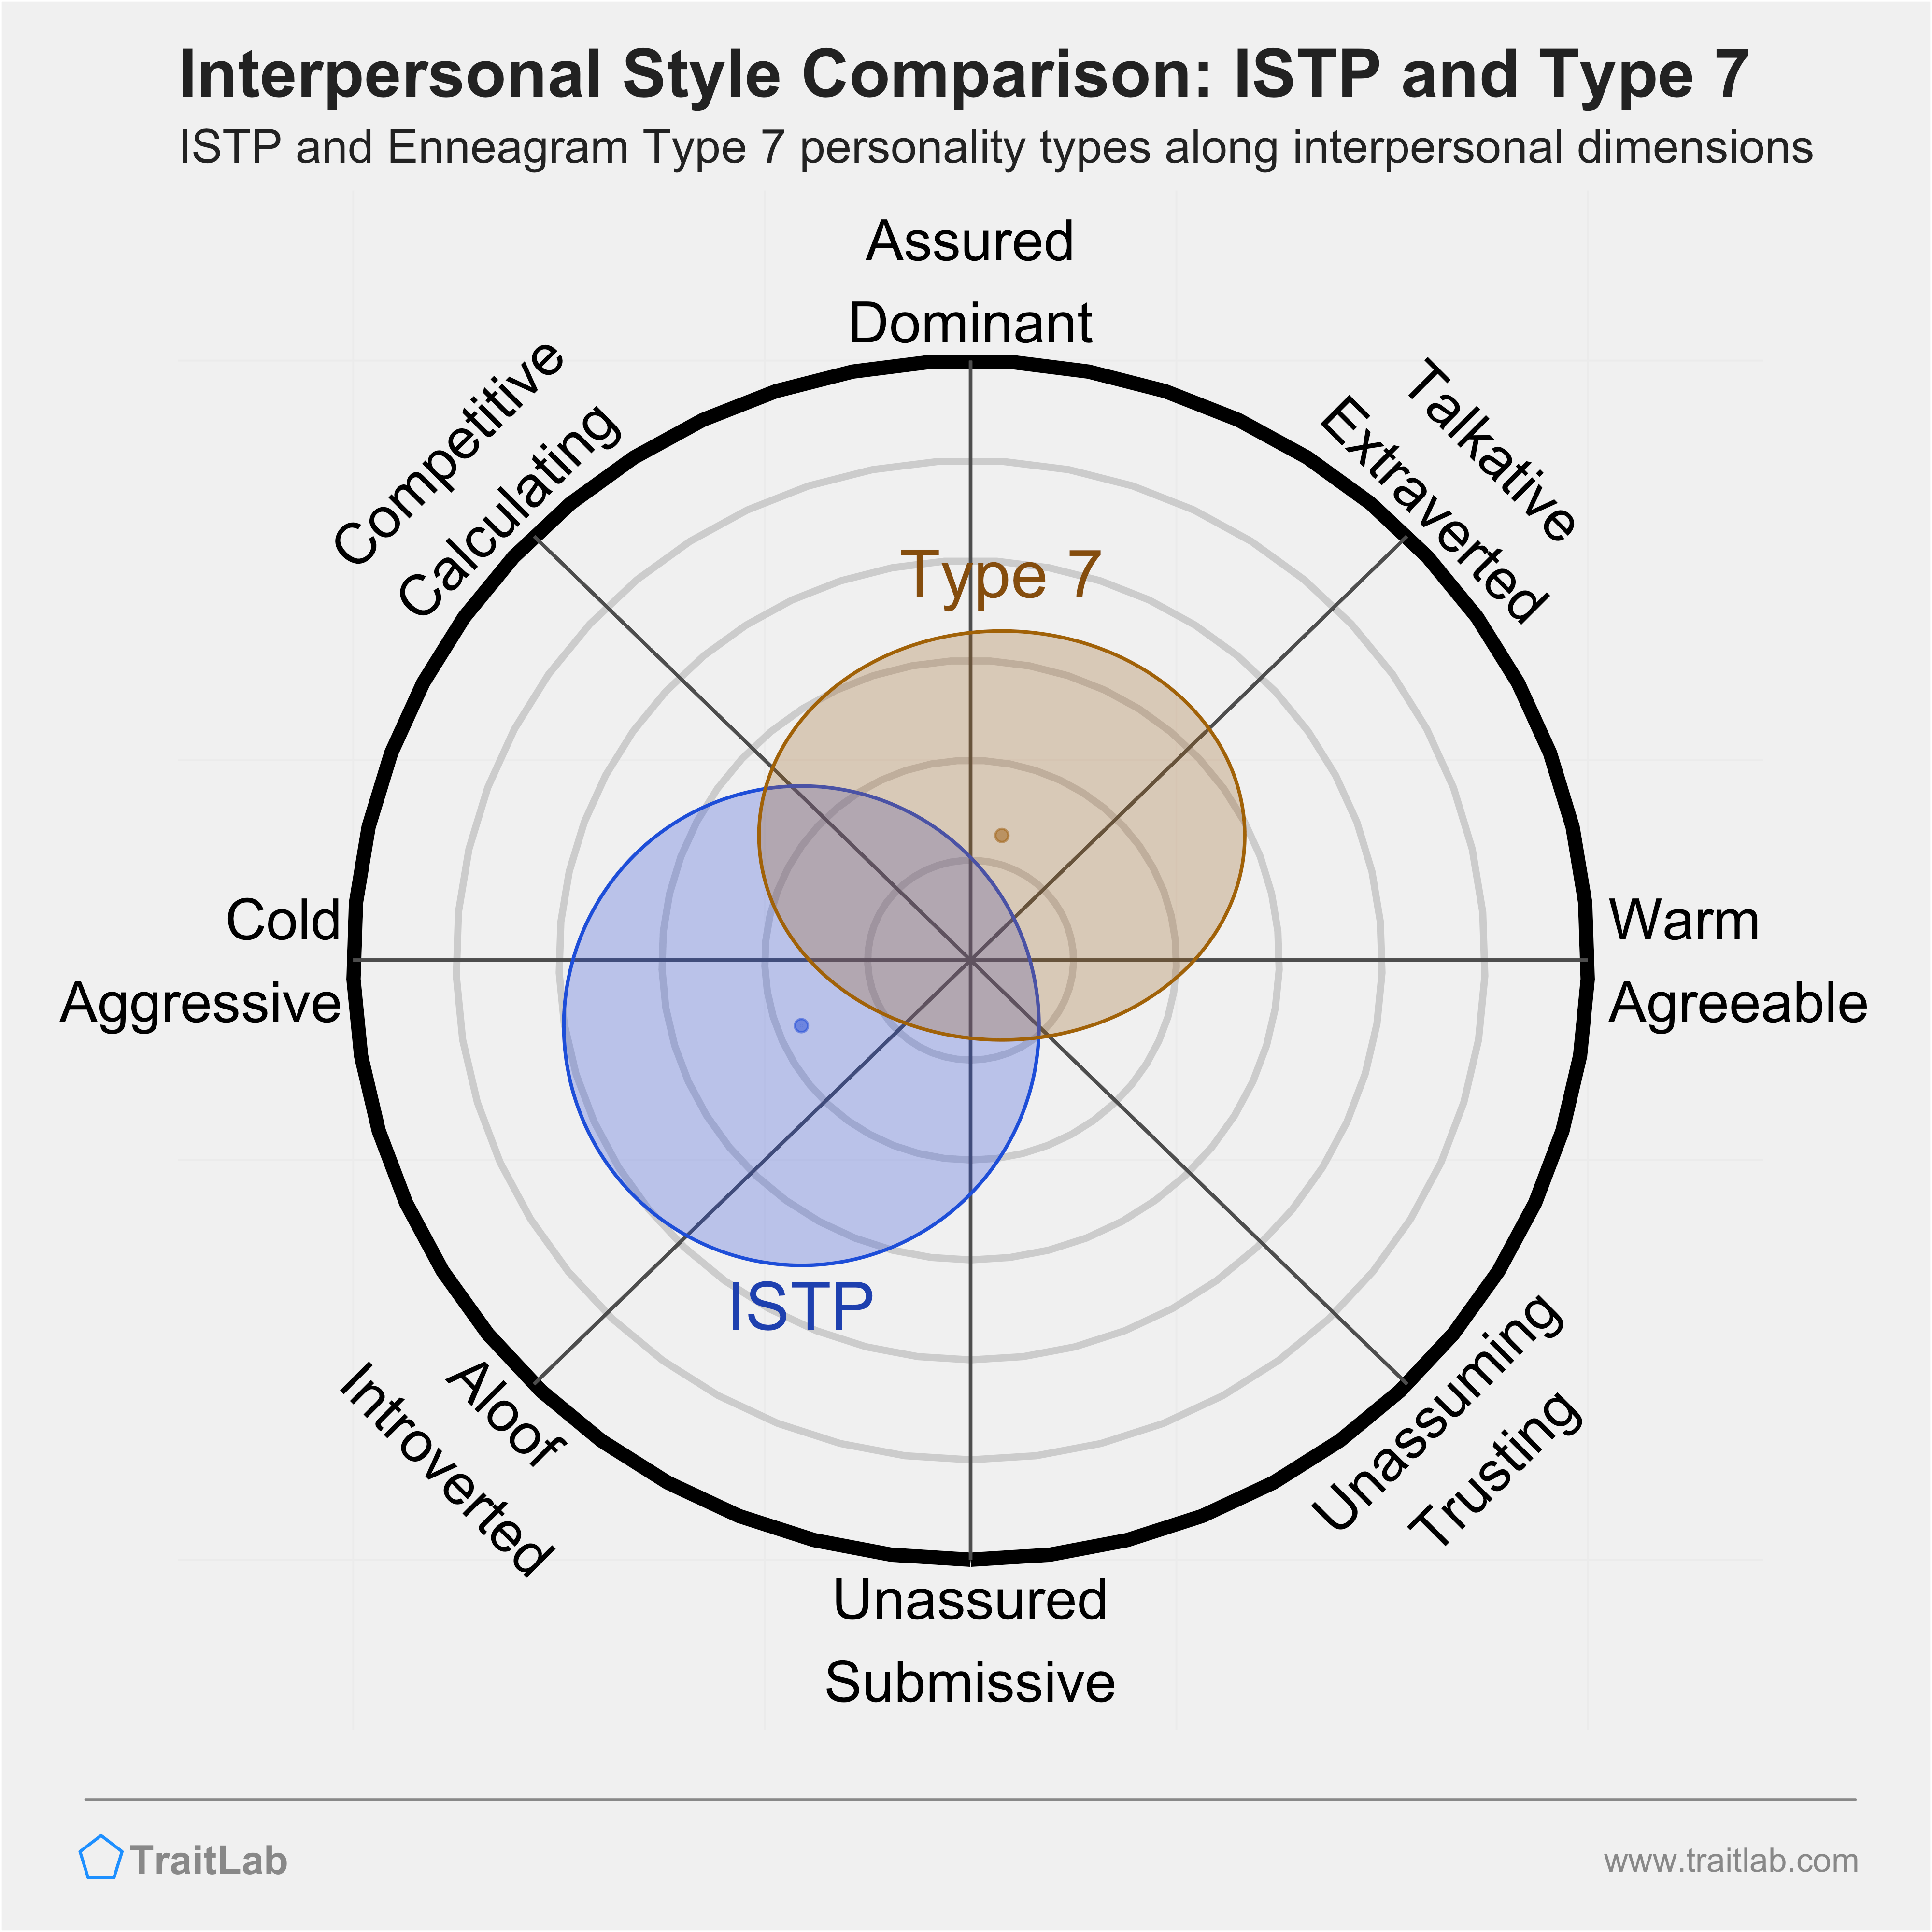 Enneagram ISTP and Type 7 comparison across interpersonal dimensions